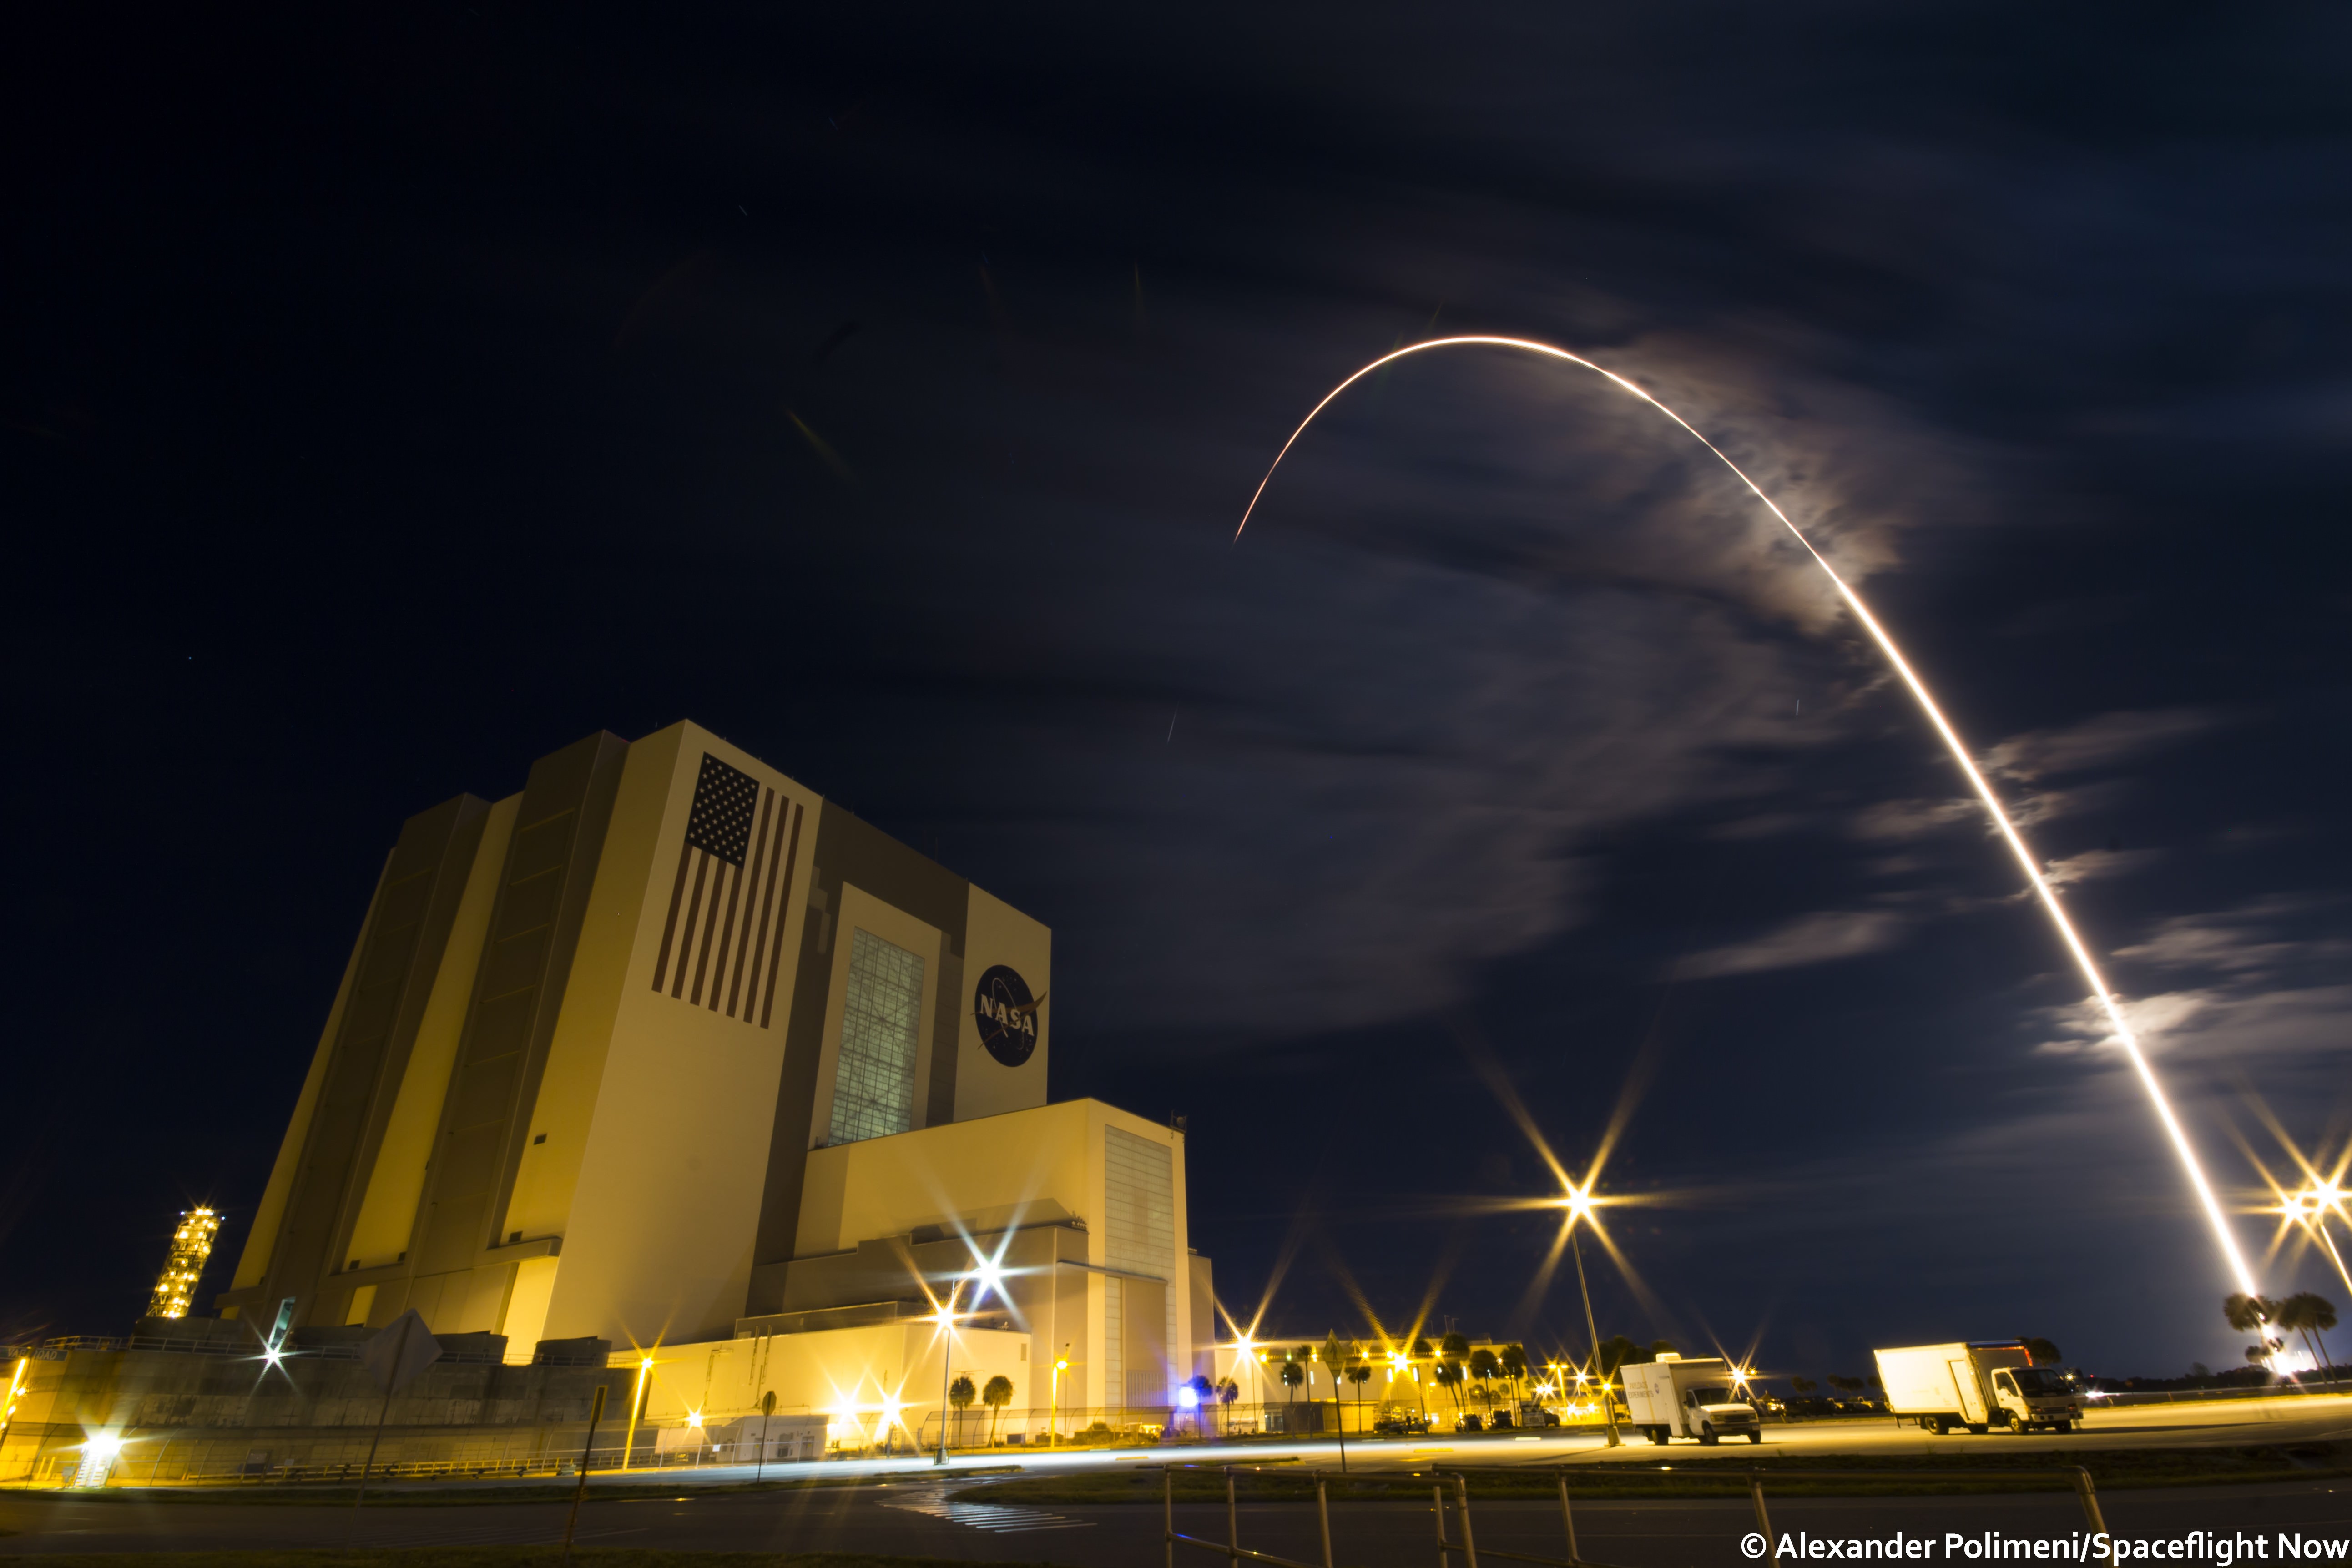 Long exposure streak shot of blastoff of United Launch Alliance Atlas V rocket carrying Orbital ATK's Cygnus spacecraft at 11:05 p.m. EDT on March 22, 2016, with foreground view of world famous Vehicle Assembly Building (VAB) at NASA’s Kennedy Space Center in Florida.  Atlas V lifted off from nearby Space Launch Complex 41 on Cape Canaveral Air Force Station in Florida. Credit: Alex Polimeni/Spaceflight Now 